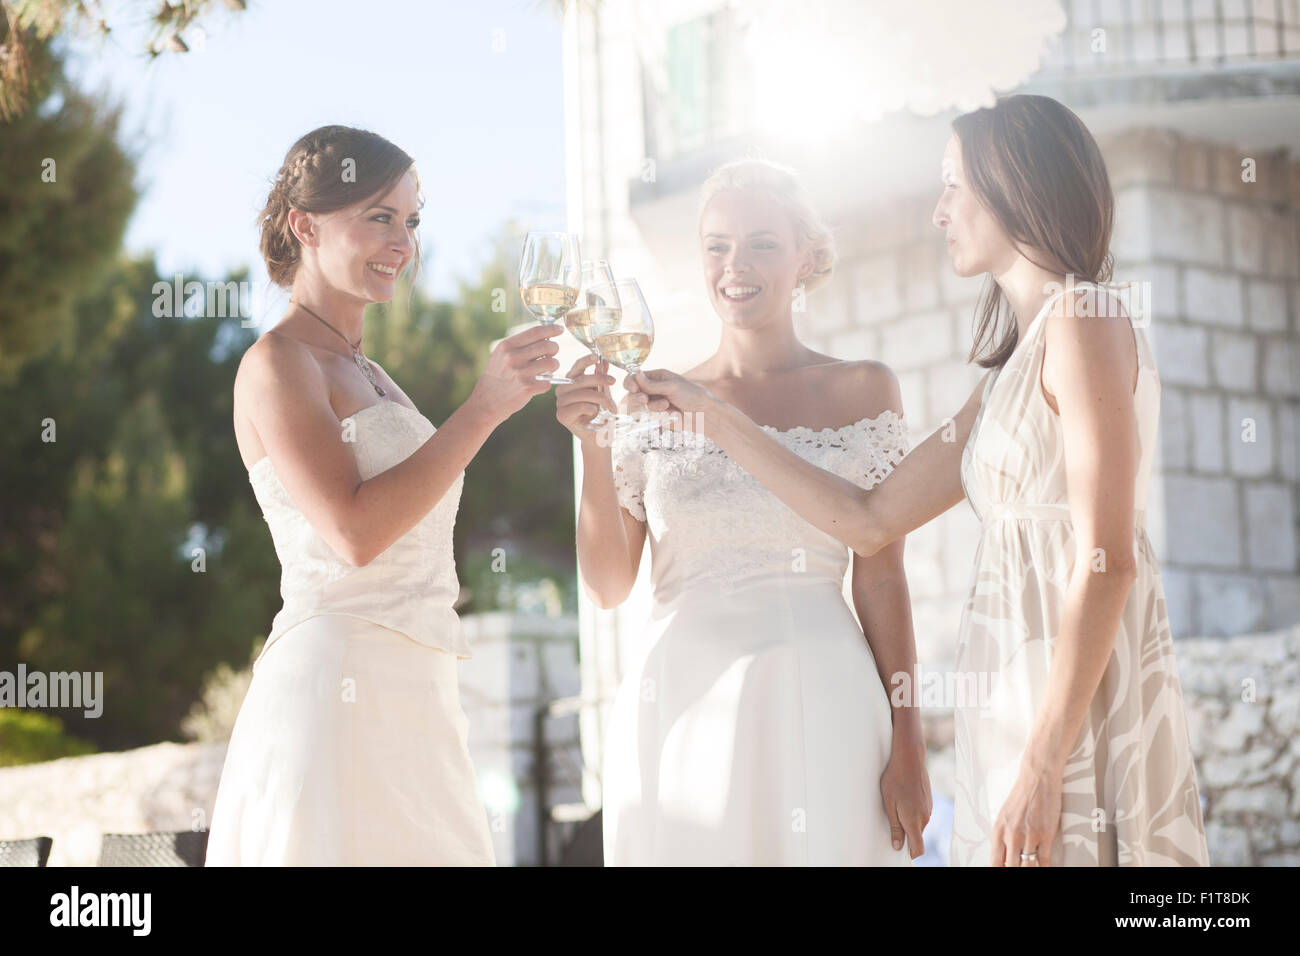 Bride and bridesmaids toasting on wedding party Stock Photo